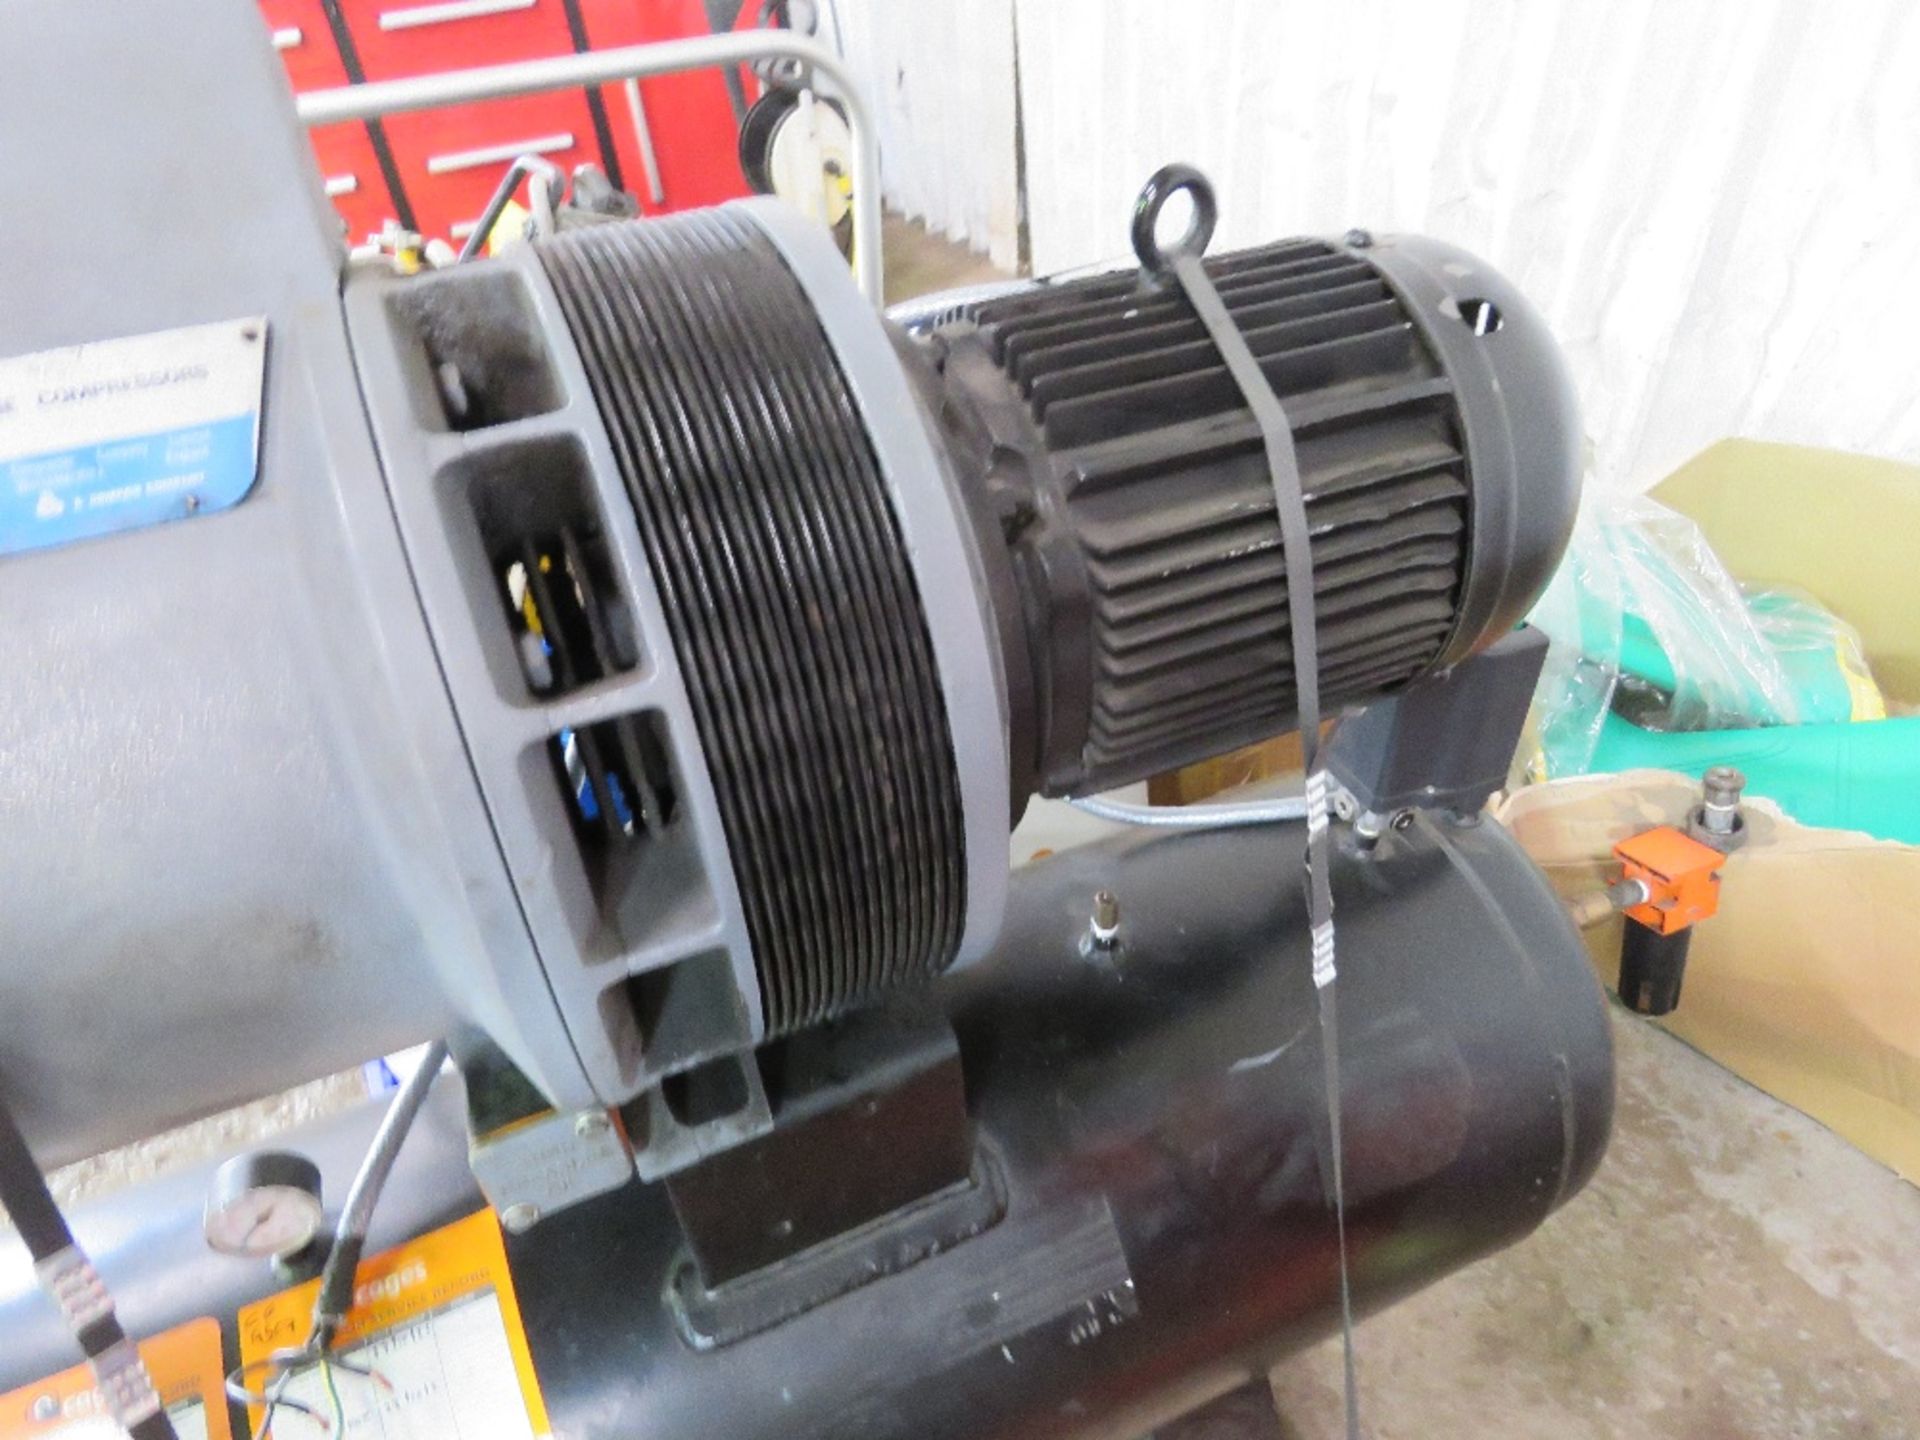 HYDROVANE 3PHASE POWERED COMPRESSOR. WORKING WHEN REMOVED. SOURCED FROM COMPANY LIQUIDATION. - Image 4 of 4